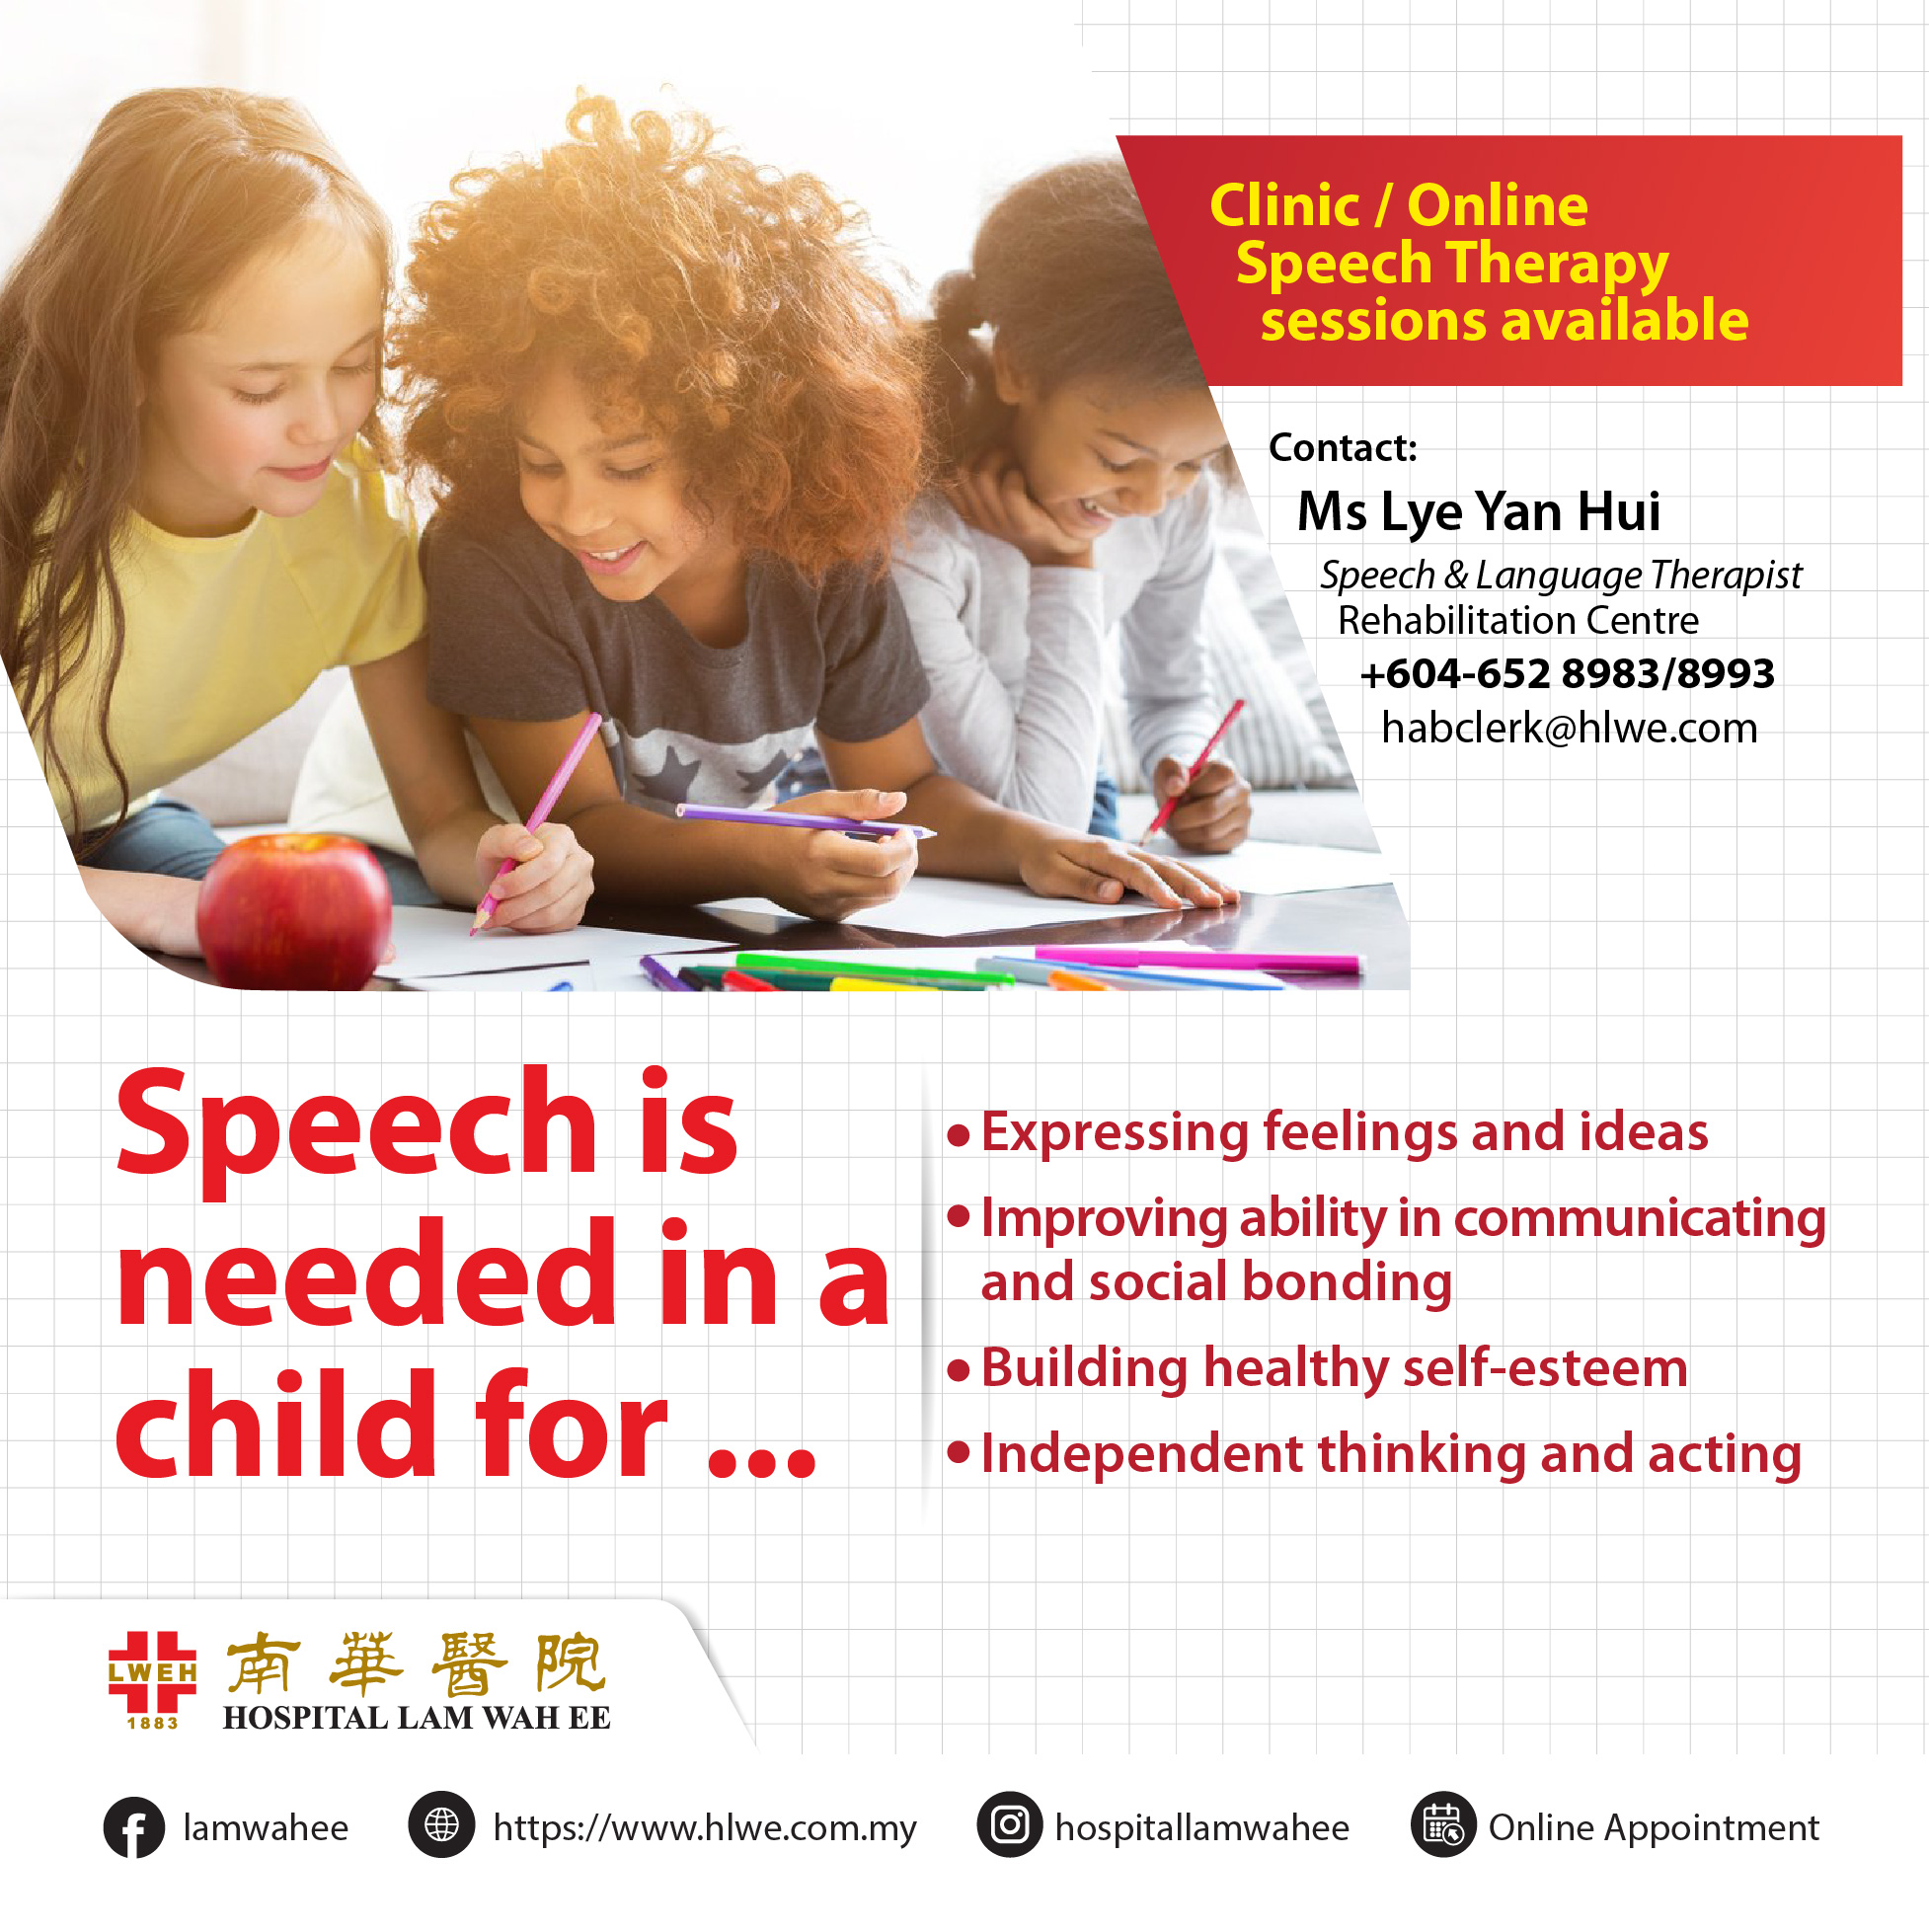 Speech is needed in a child for...